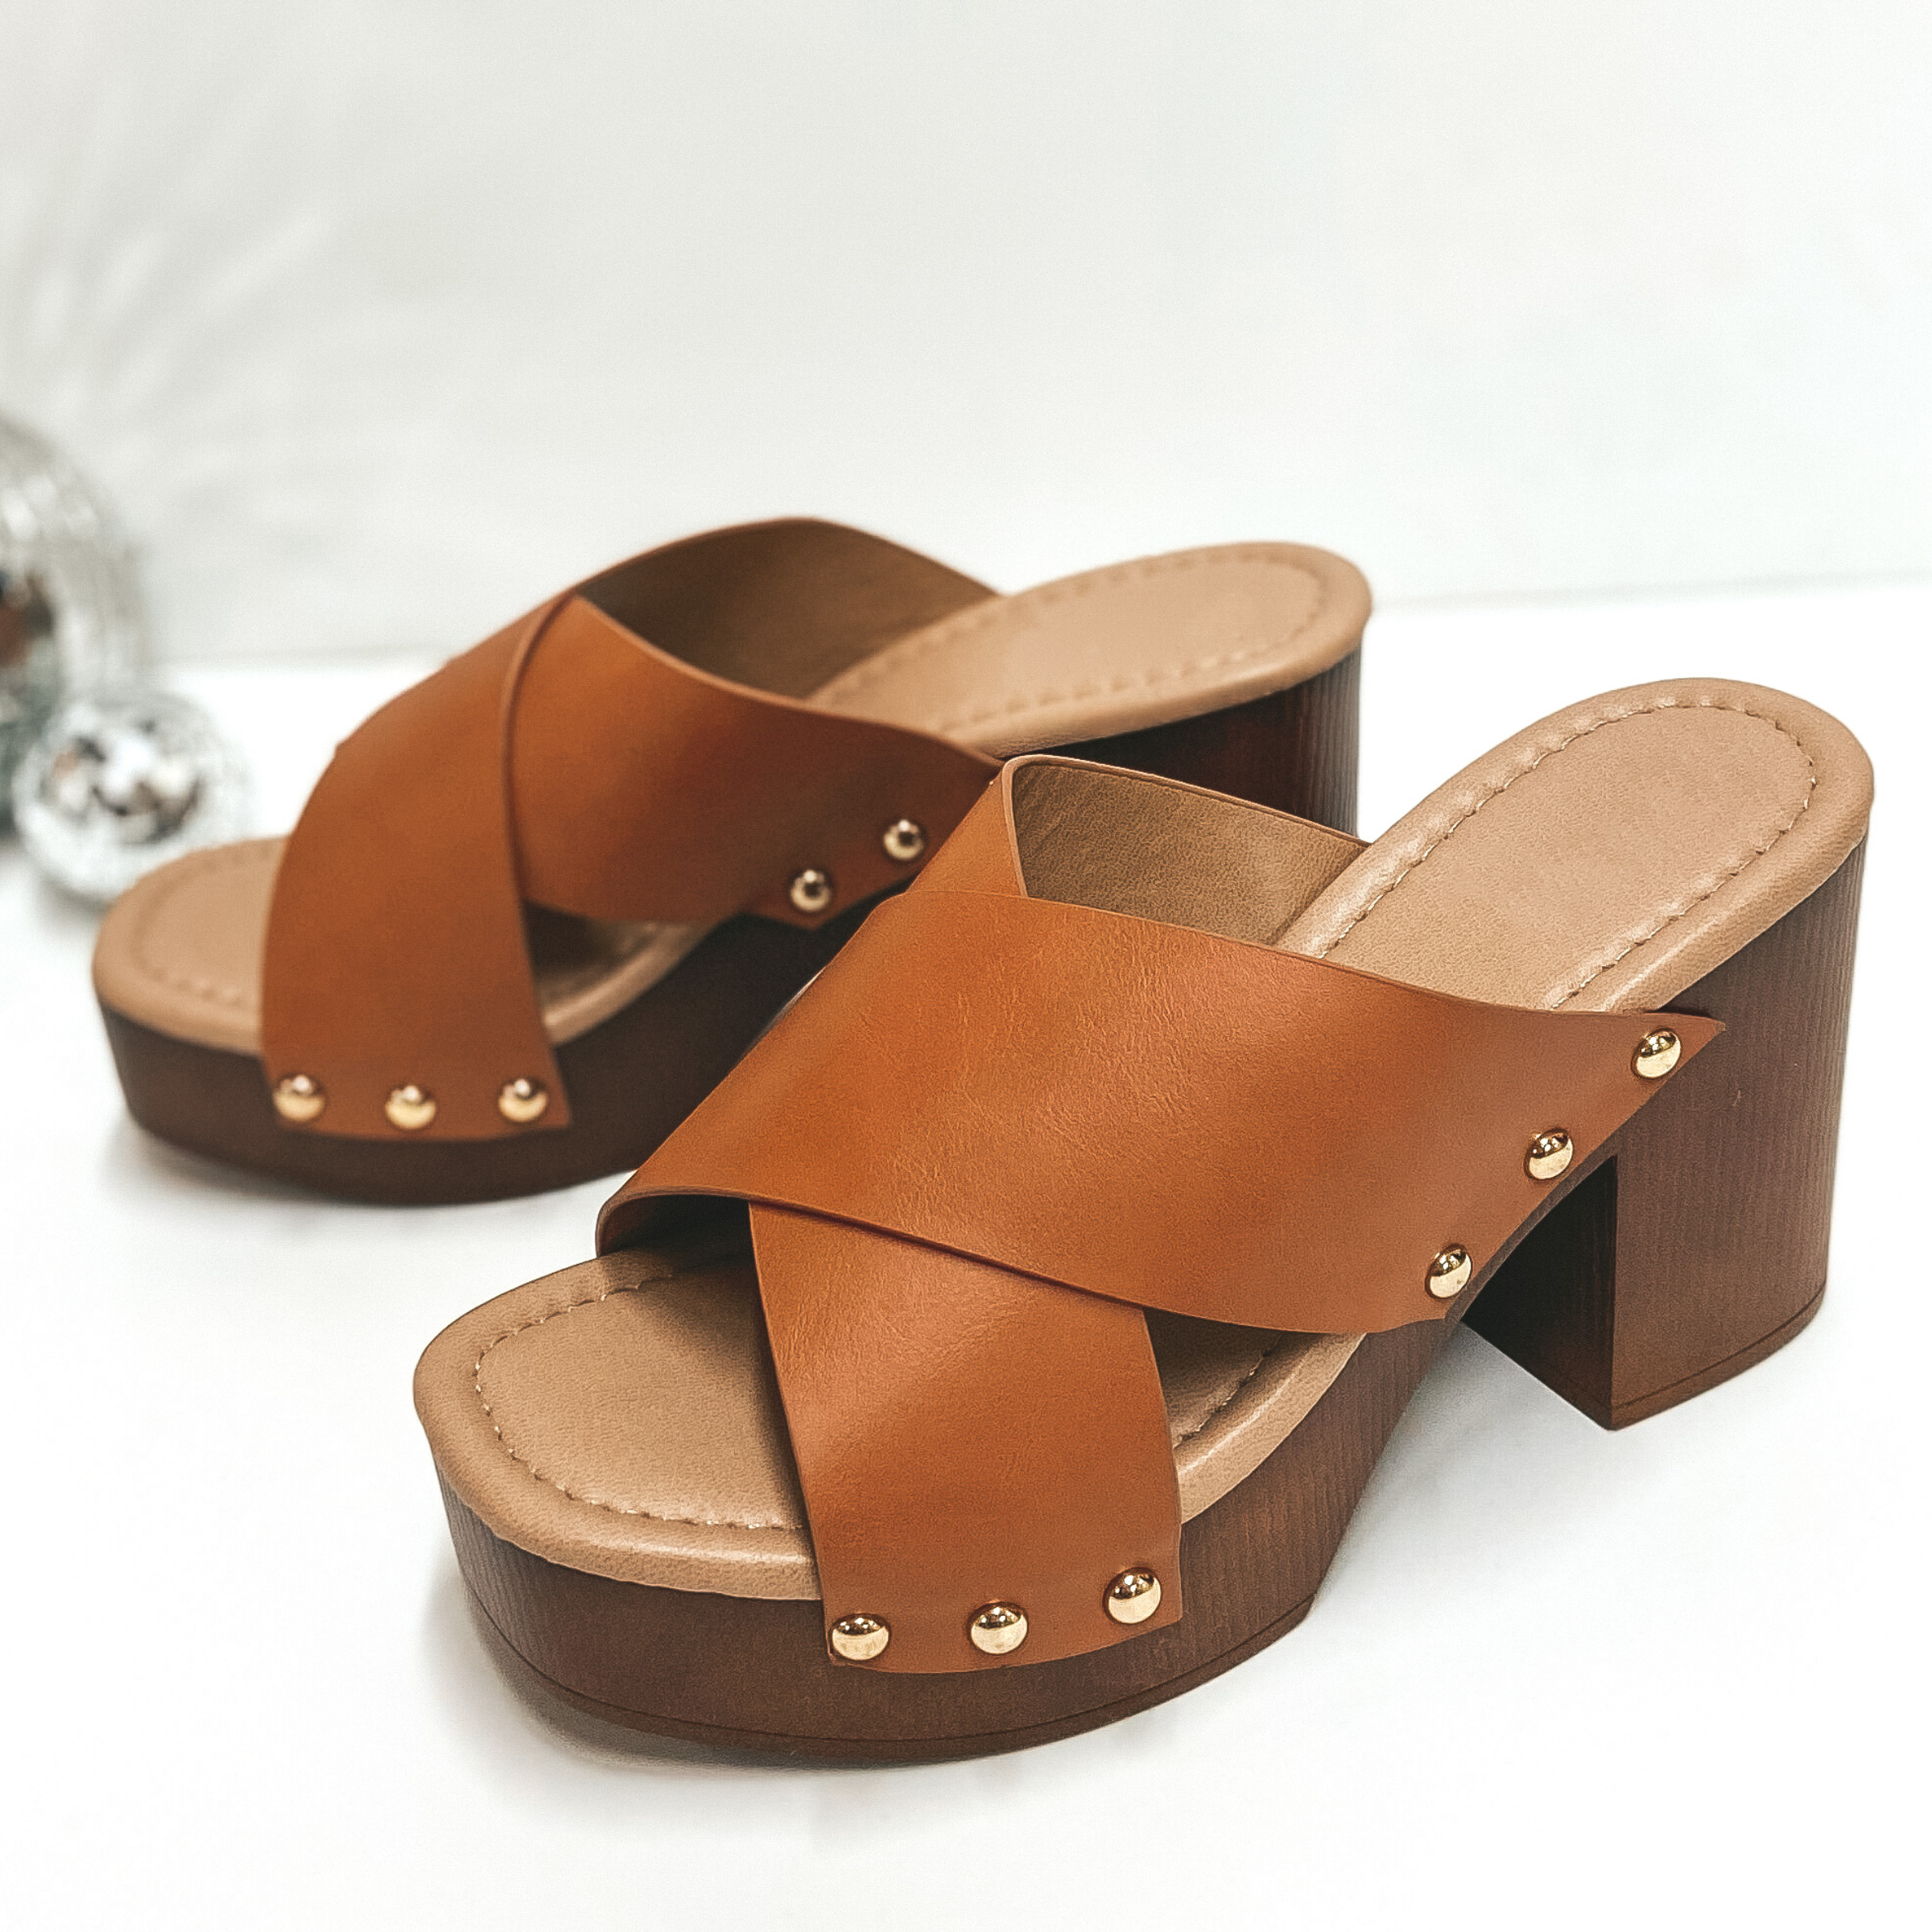 A pair of clog style heels with a cognac brown criss cross band. Pictured on white background with disco balls.